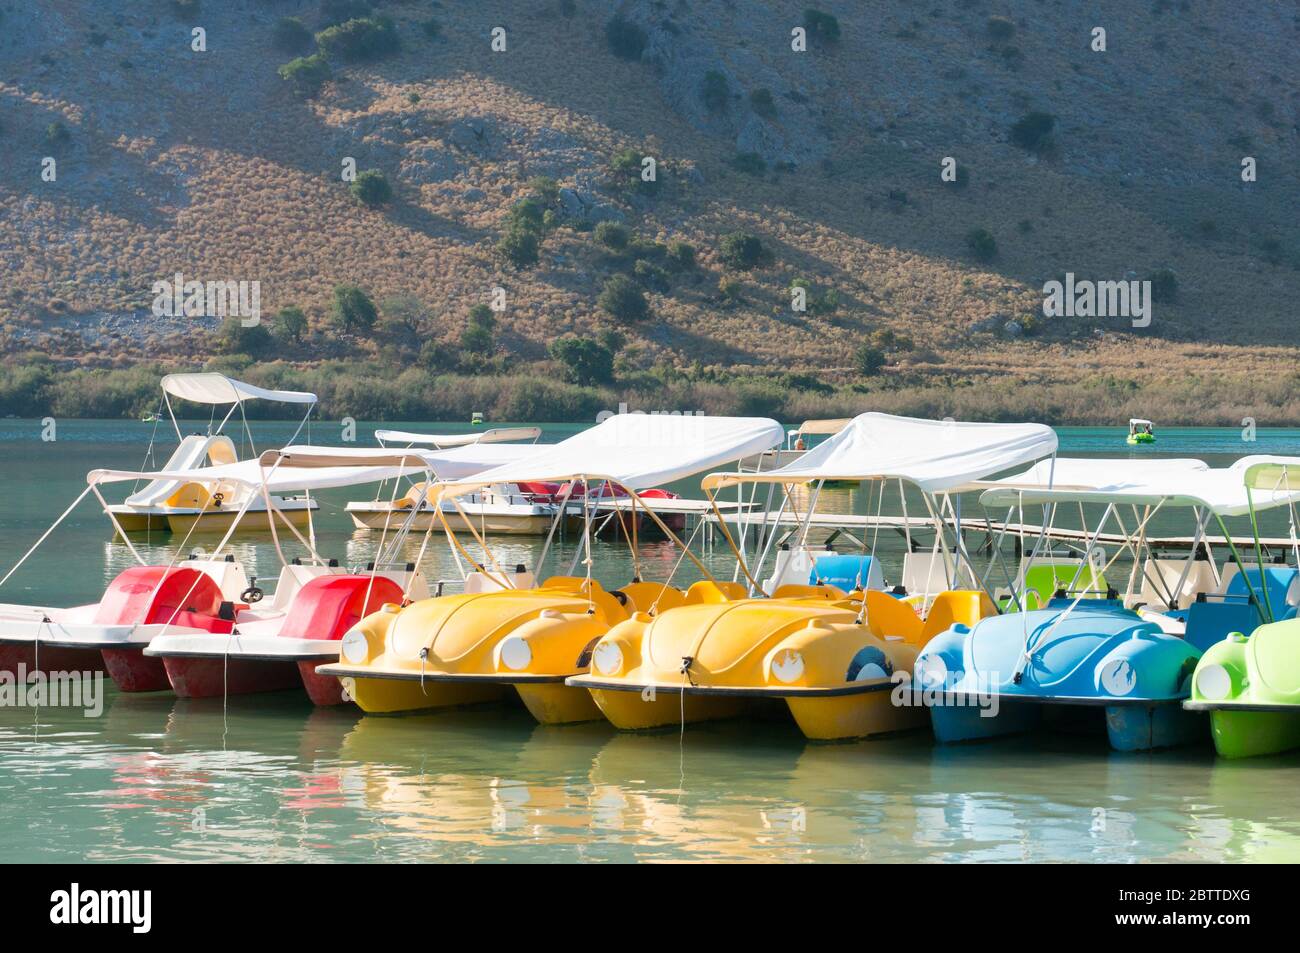 Kournas lake, Crete, Greece-October 13, 2019: colorful water catamarans near the shore of a magnificent lake in the mountains on a sunny summer day. Stock Photo